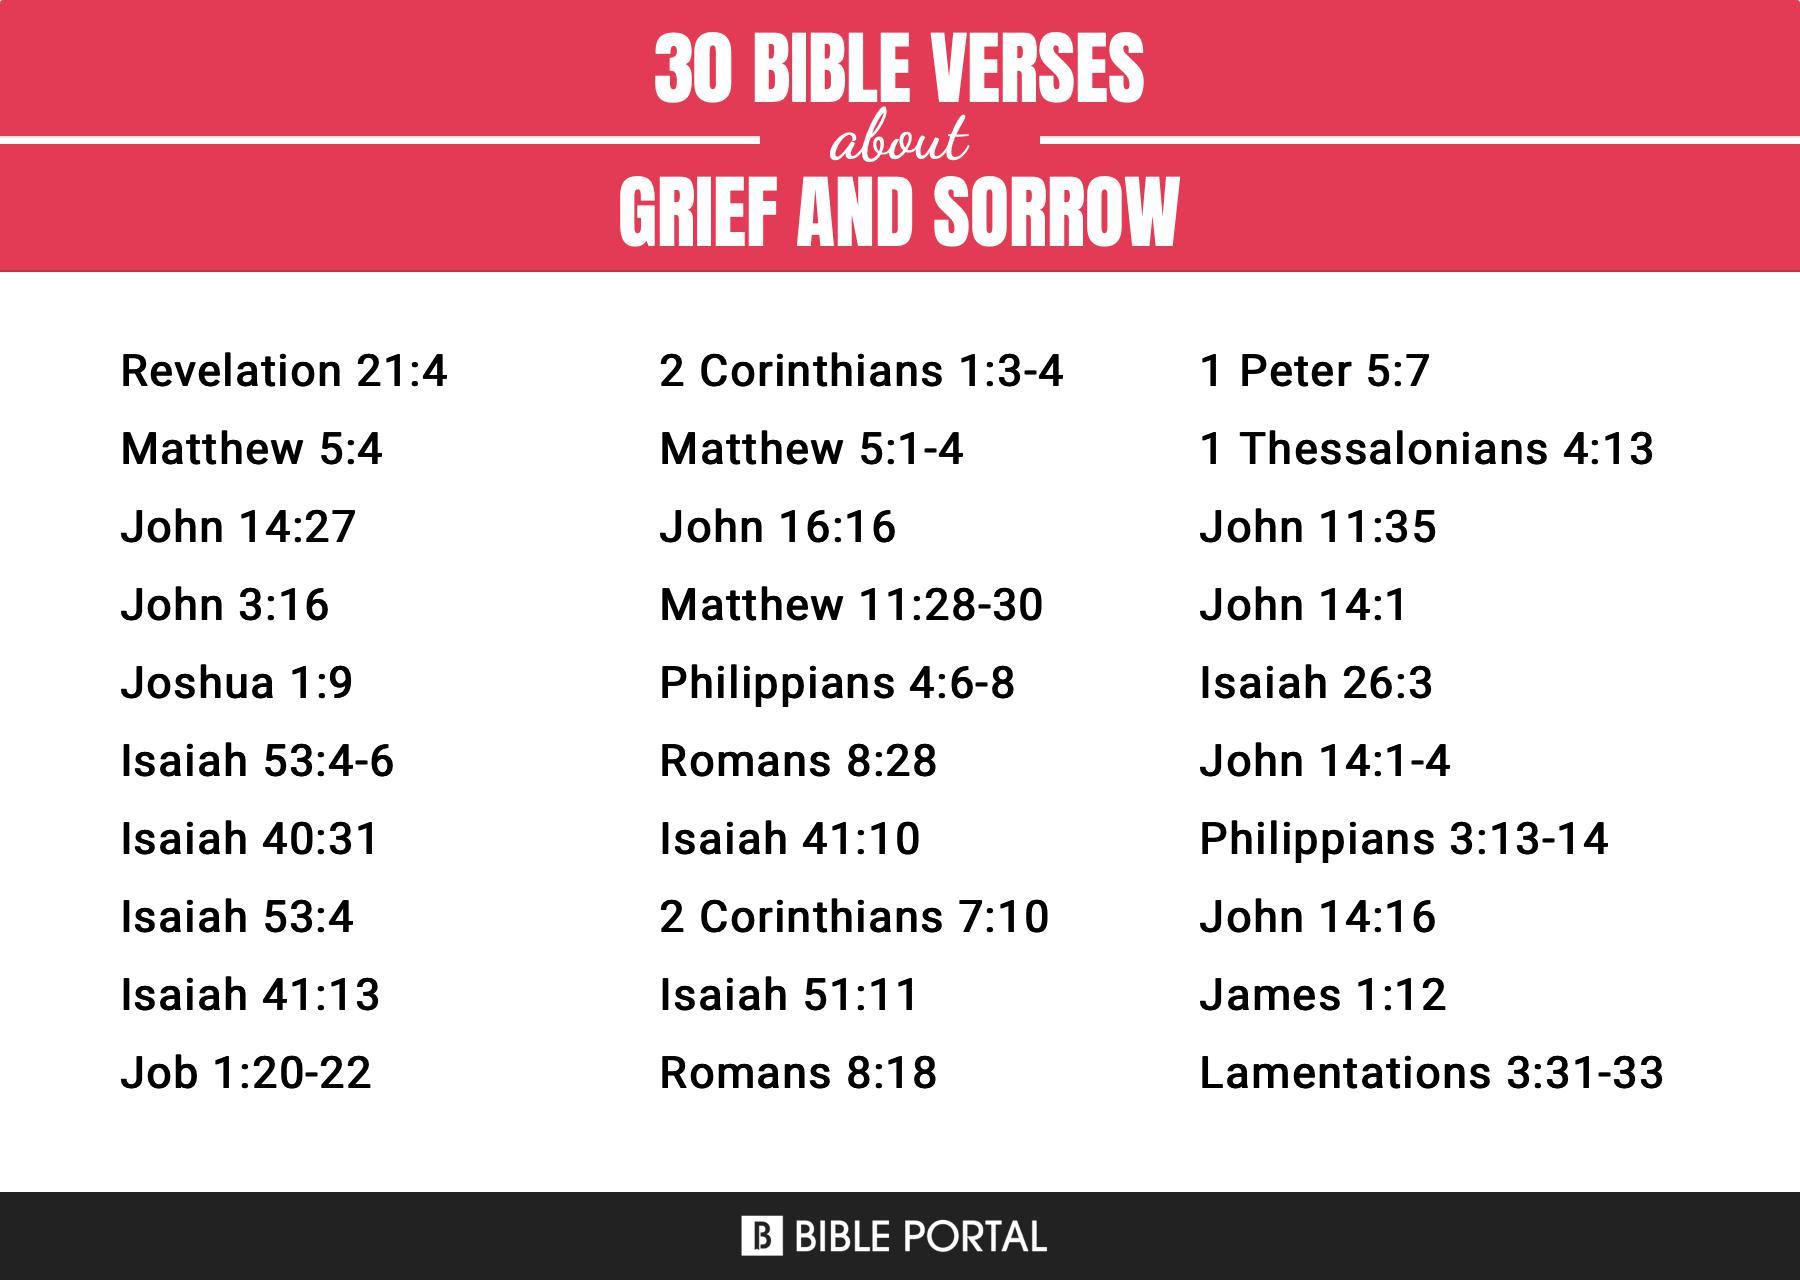 What Does the Bible Say about Grief And Sorrow?